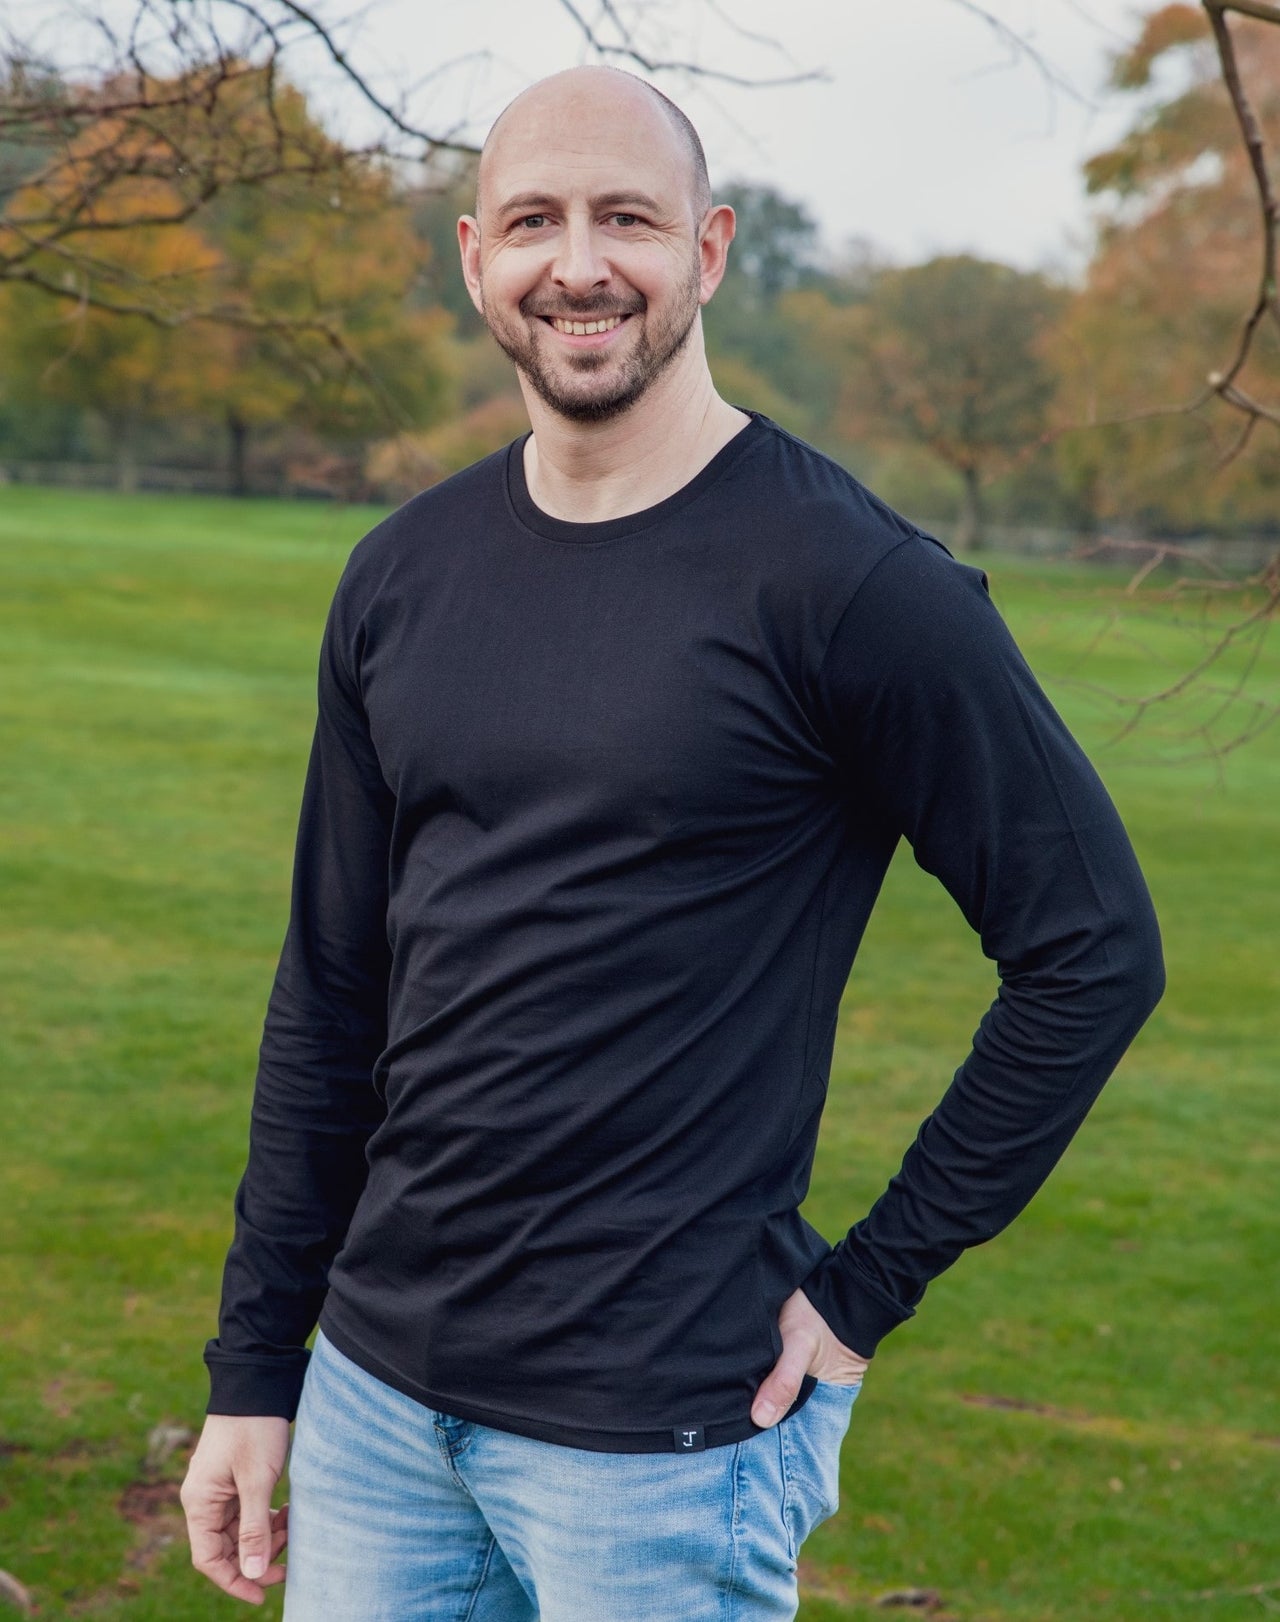 A tall athletic guy wearing a long sleeve black tall t-shirt and smiling in a park with hand in back pocket.